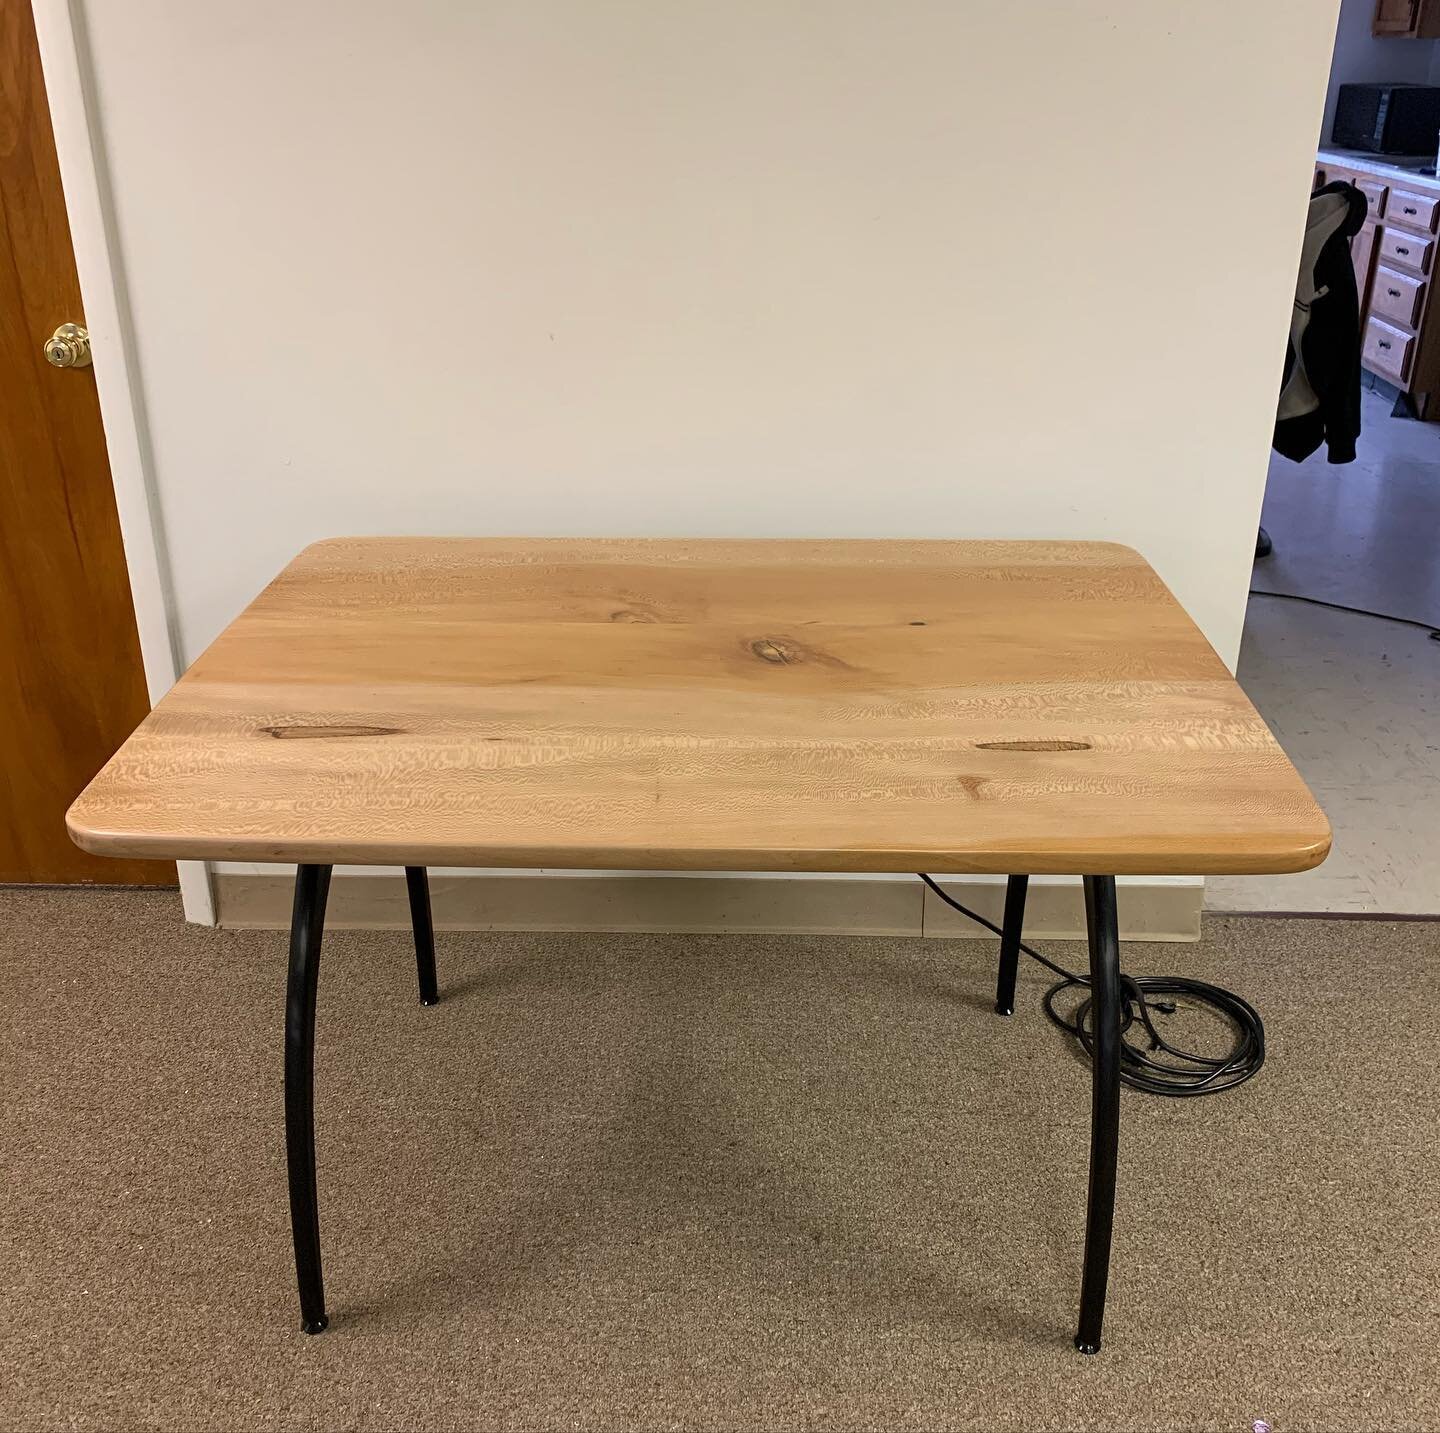 Two pieces recently delivered all the to Manhattan, NY! A sycamore desk with pre-installed outlet and cable management, and a walnut console table with all-wood mechanism for the drawer.
.
.
.
#furniture #design #philadelphia #manayunk #woodworking #